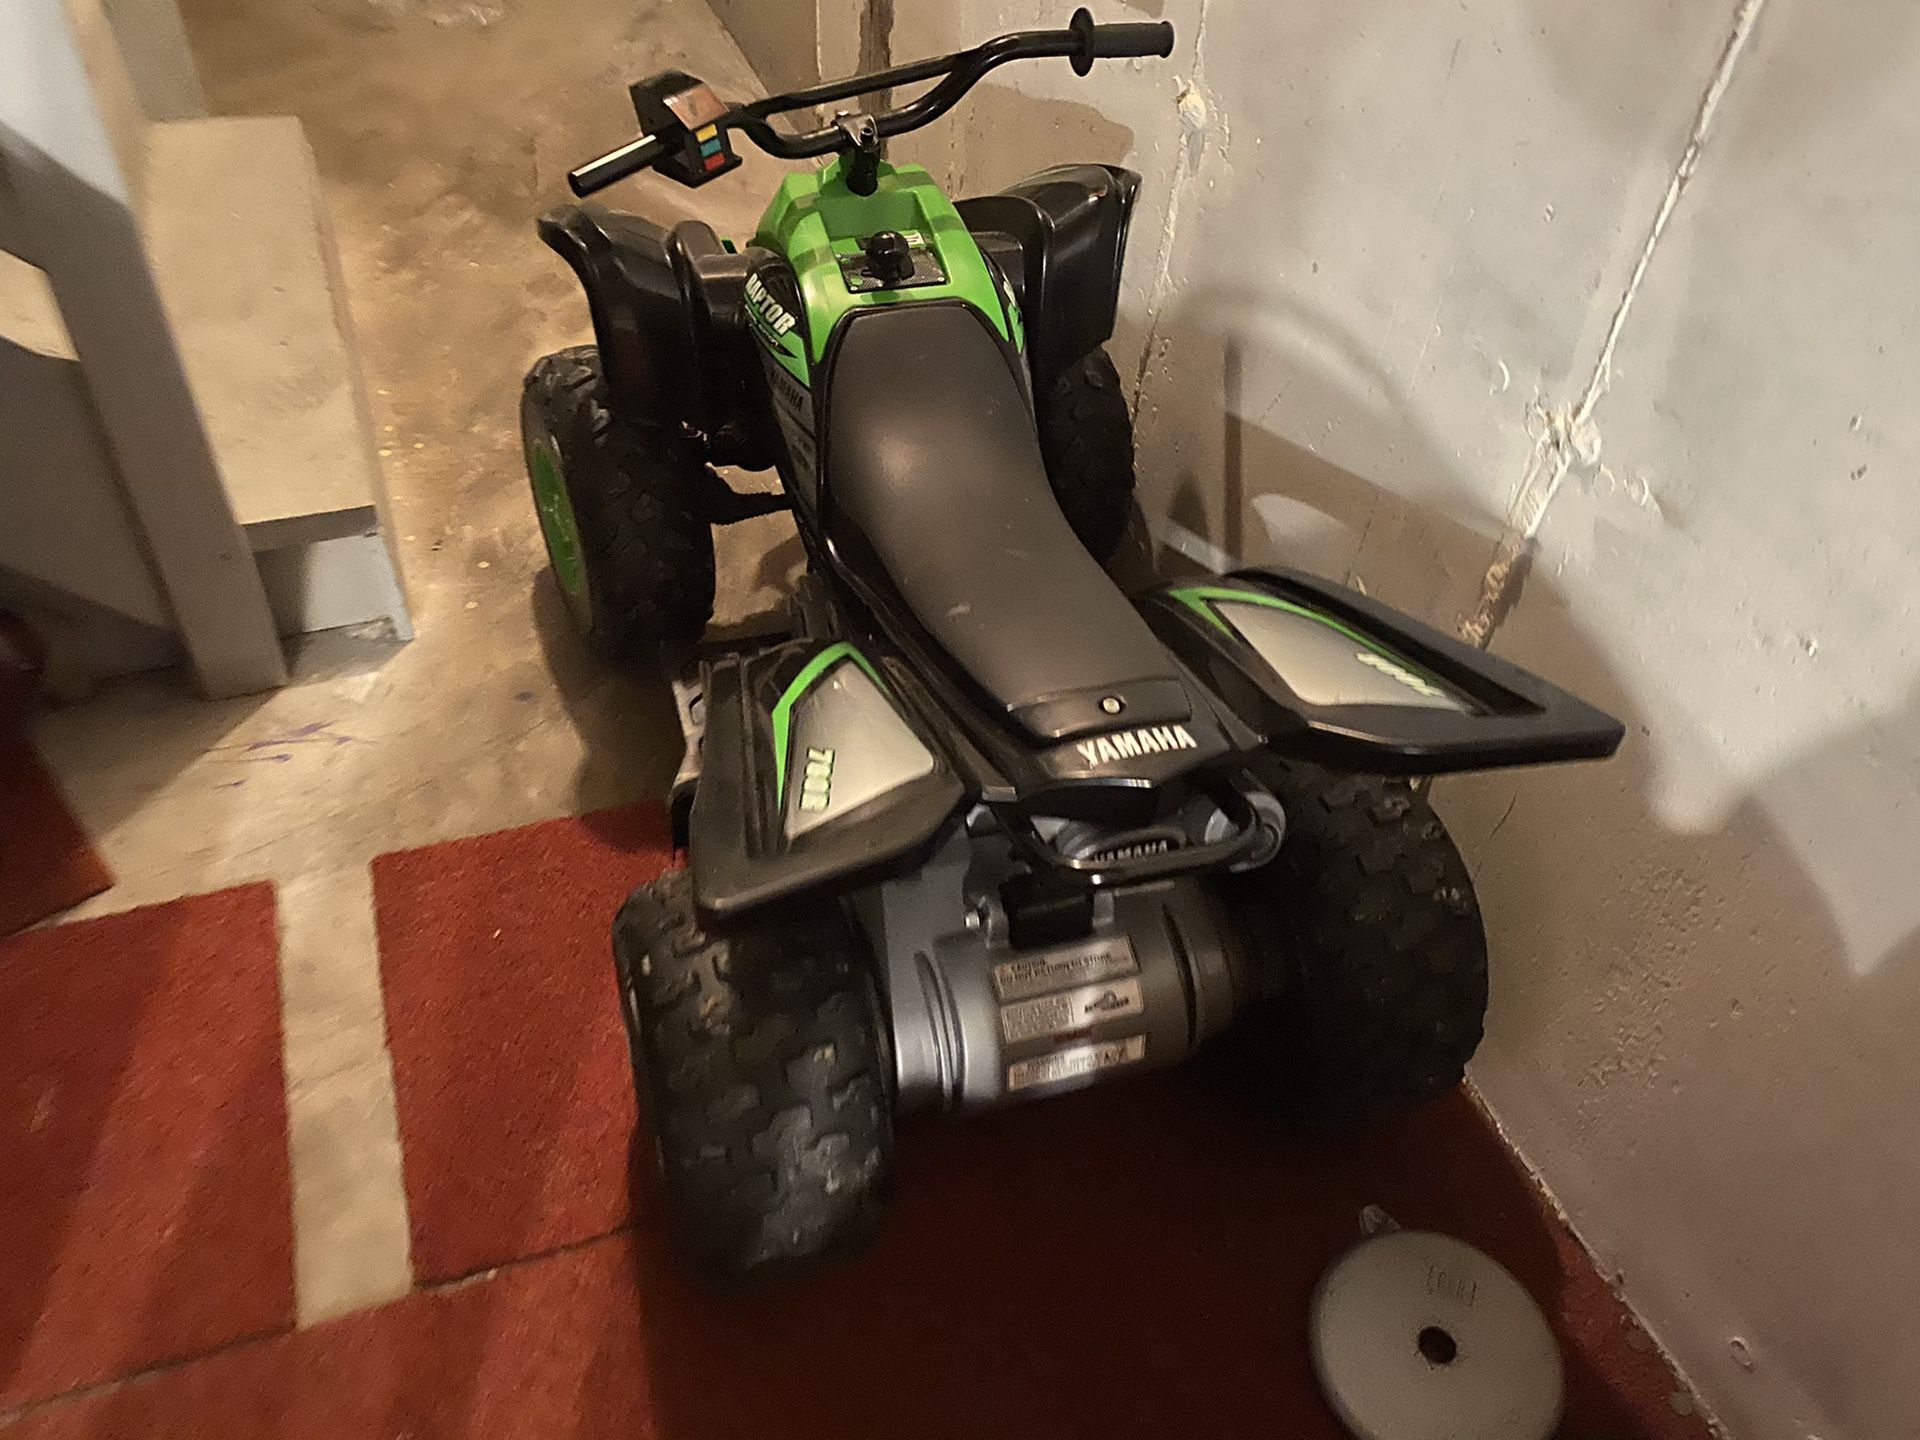 4 wheeler only rode 2 times still in perfect condition everything works still has charger for battery.. son just is not into that type of stuff.. sel